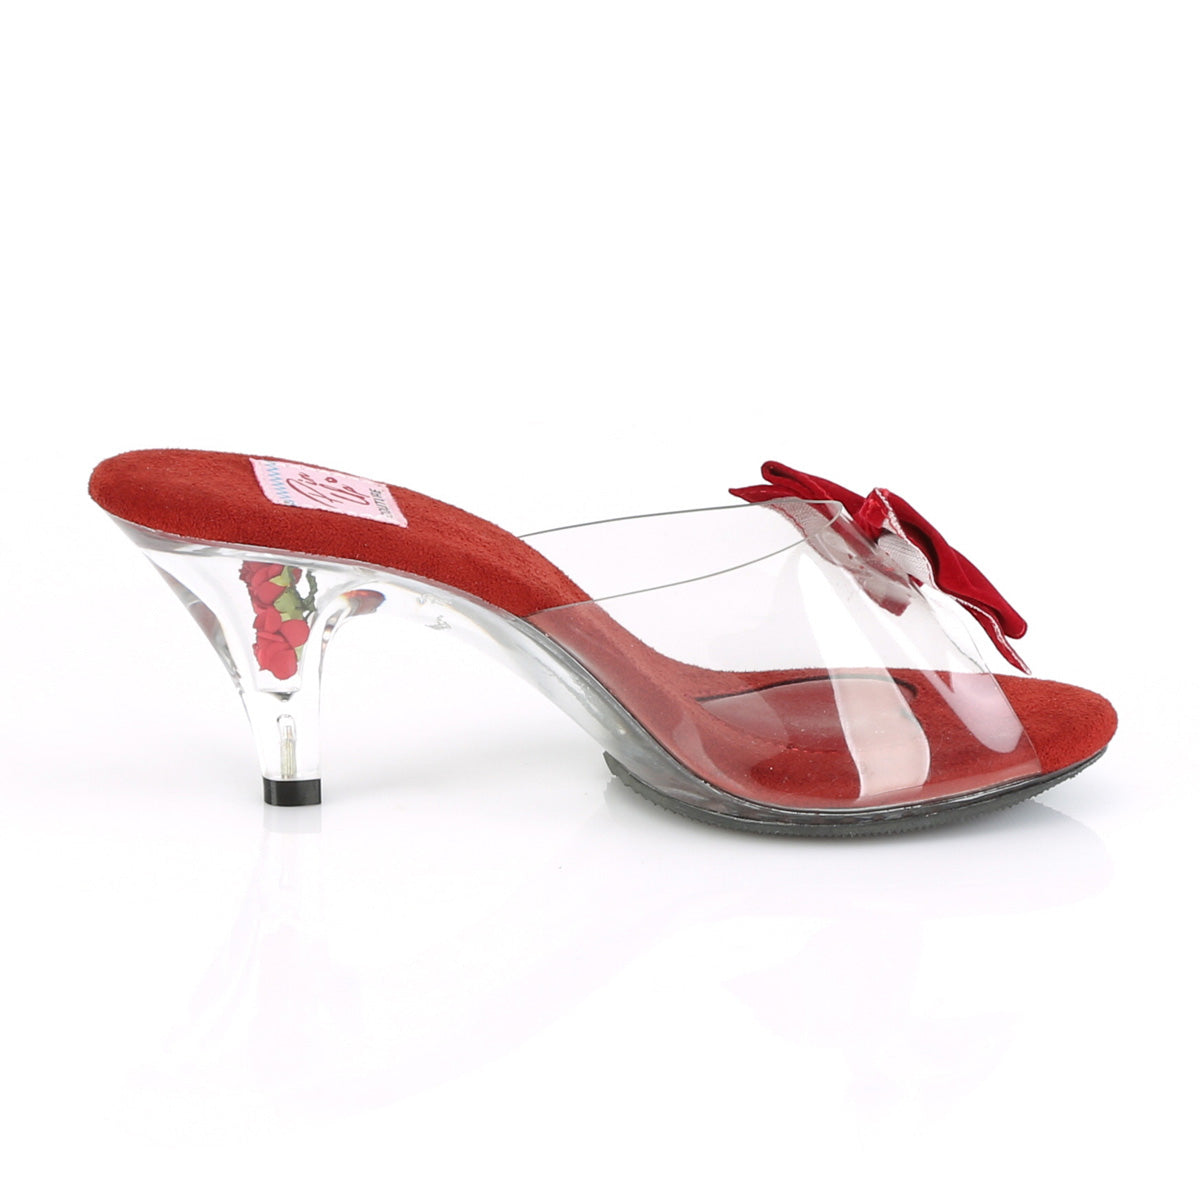 BELLE-301BOW Pin Up Couture Clear-Red/Clear Single Soles [Retro Glamour Shoes]